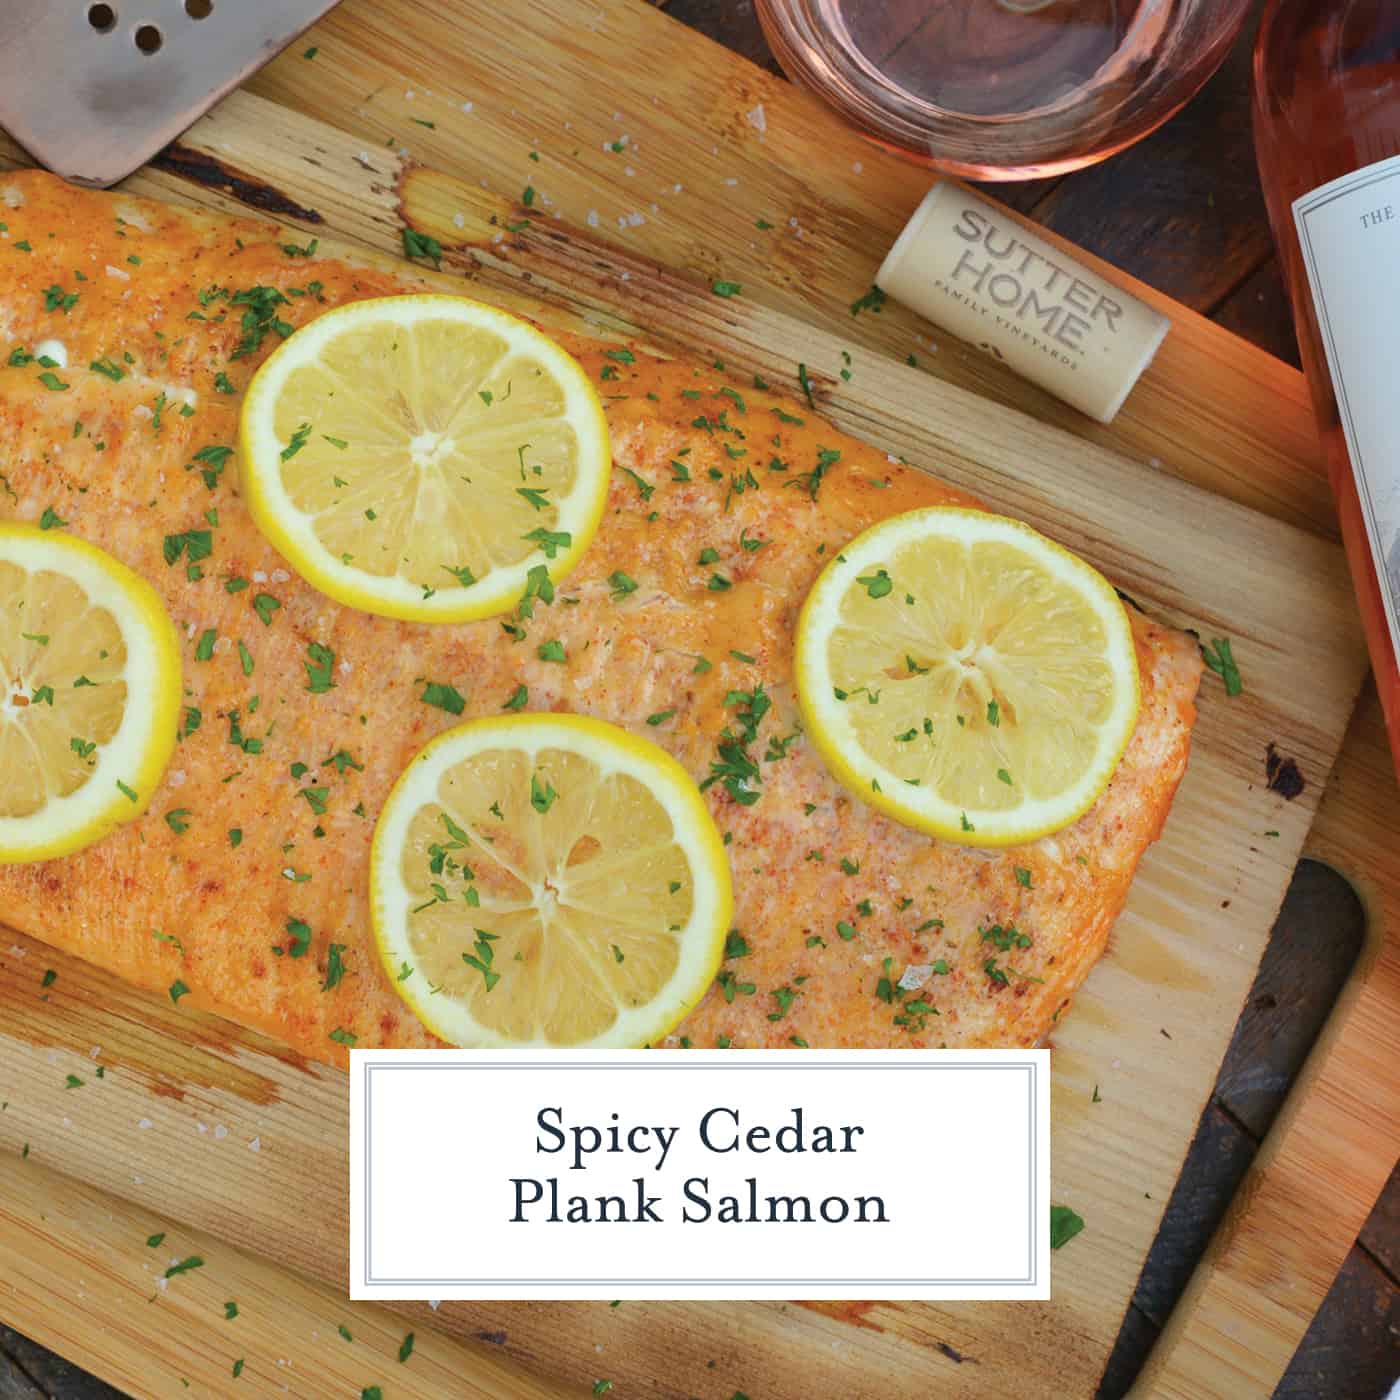 Spicy Cedar Plank Salmon is an easy grilled salmon recipe using a spicy salmon glaze. Perfect for a hot summer night and pairing with a crisp, sweet wine. #cedarplanksalmon #salmononthegrill #spicysalmon www.savoryexperiments.com